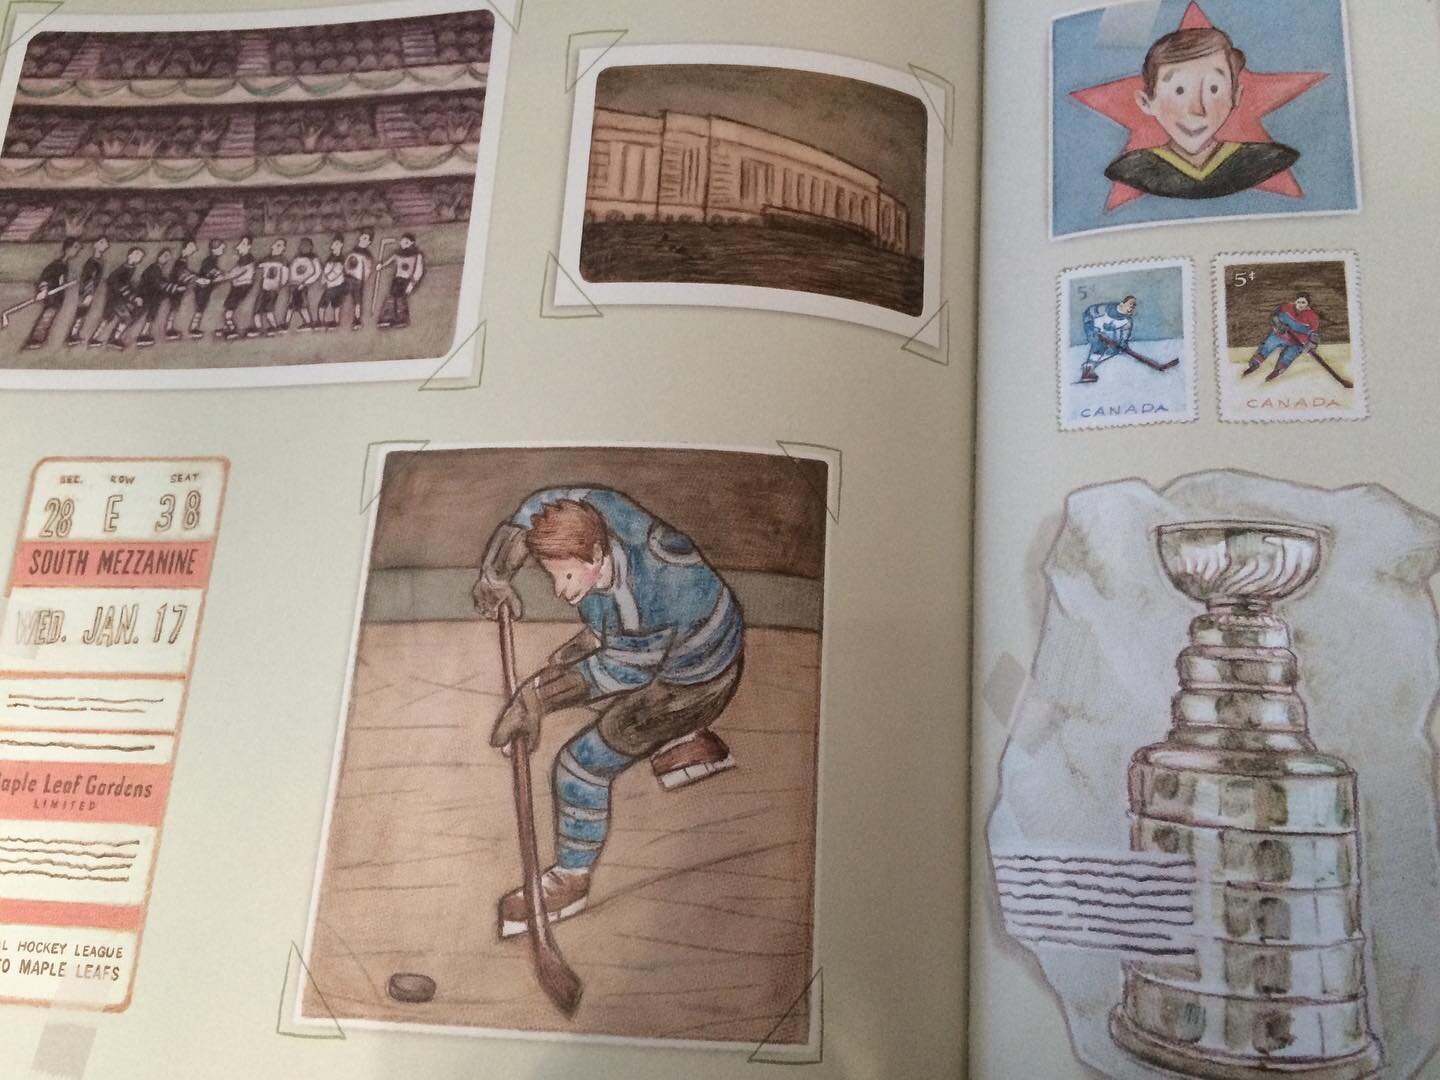 Thank you @publisherswkly for the first review! Here&rsquo;s a peek at the spread they choose to highlight as &lsquo;amplifying the story&rsquo;s warm, nostalgic tone.&rsquo; Hockey feels nostalgic to me since growing up it was like the radio, left p